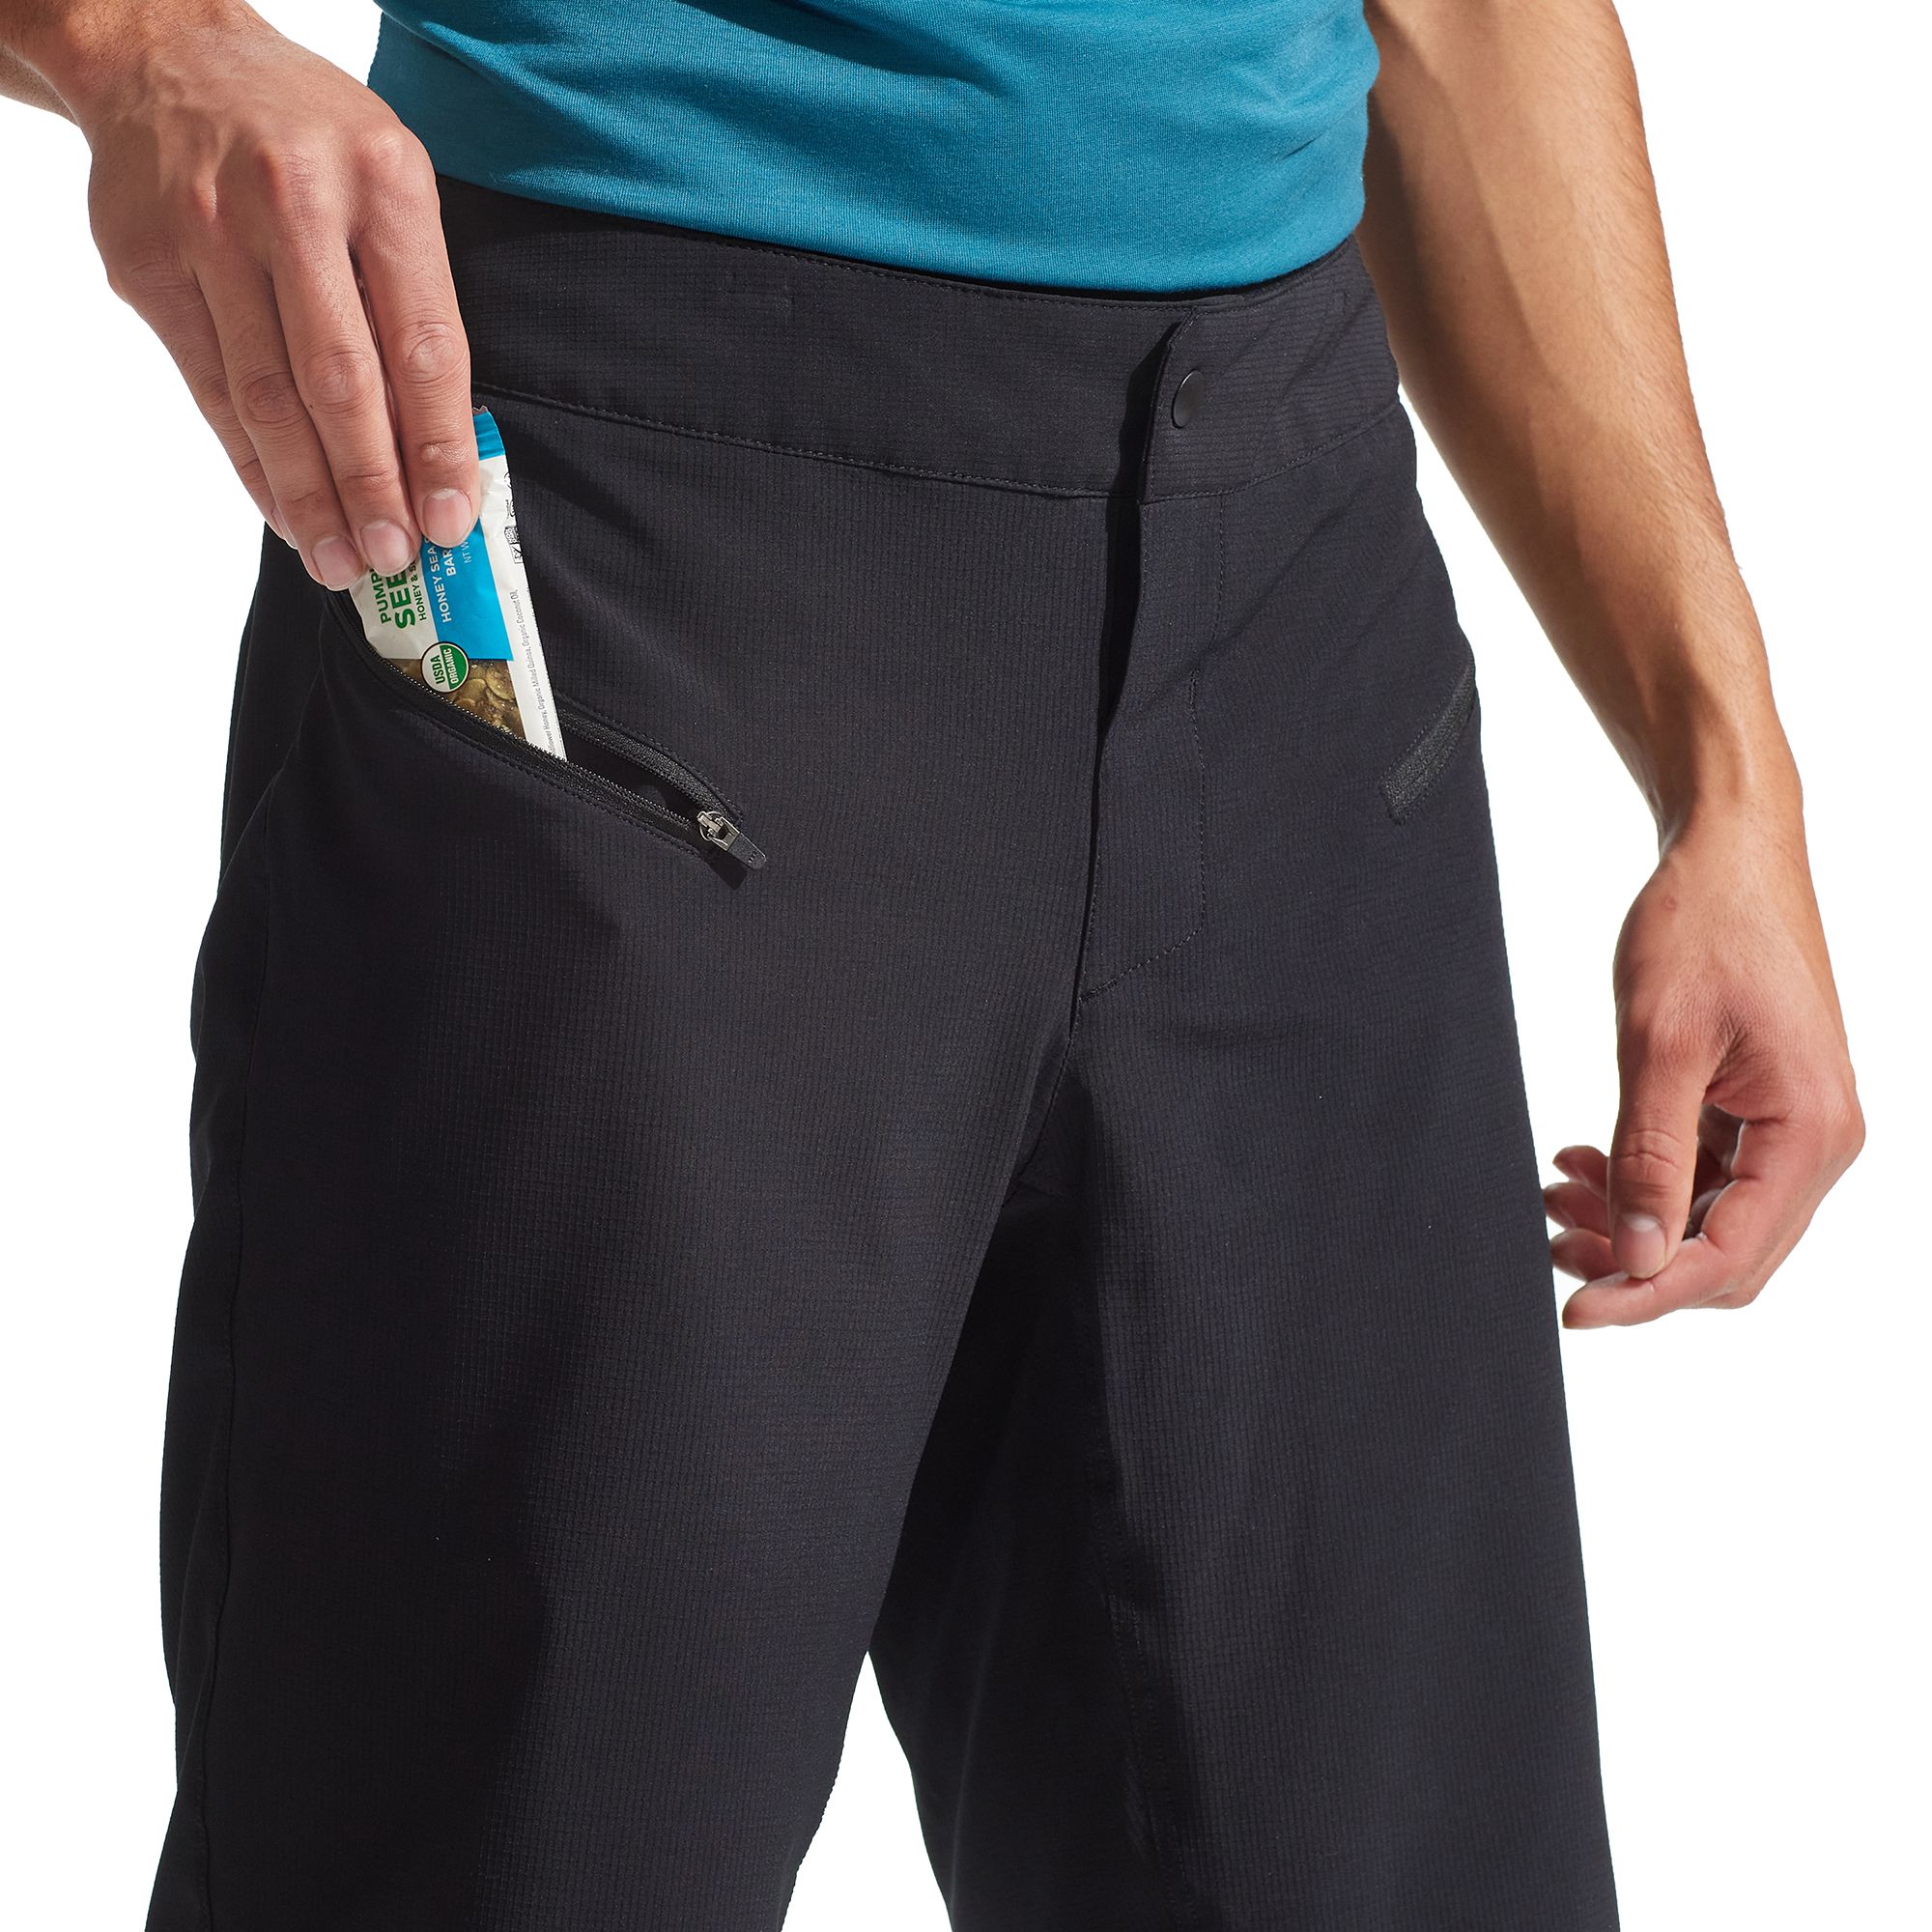 PEARL iZUMi Men's Canyon Bike Shorts with Liner